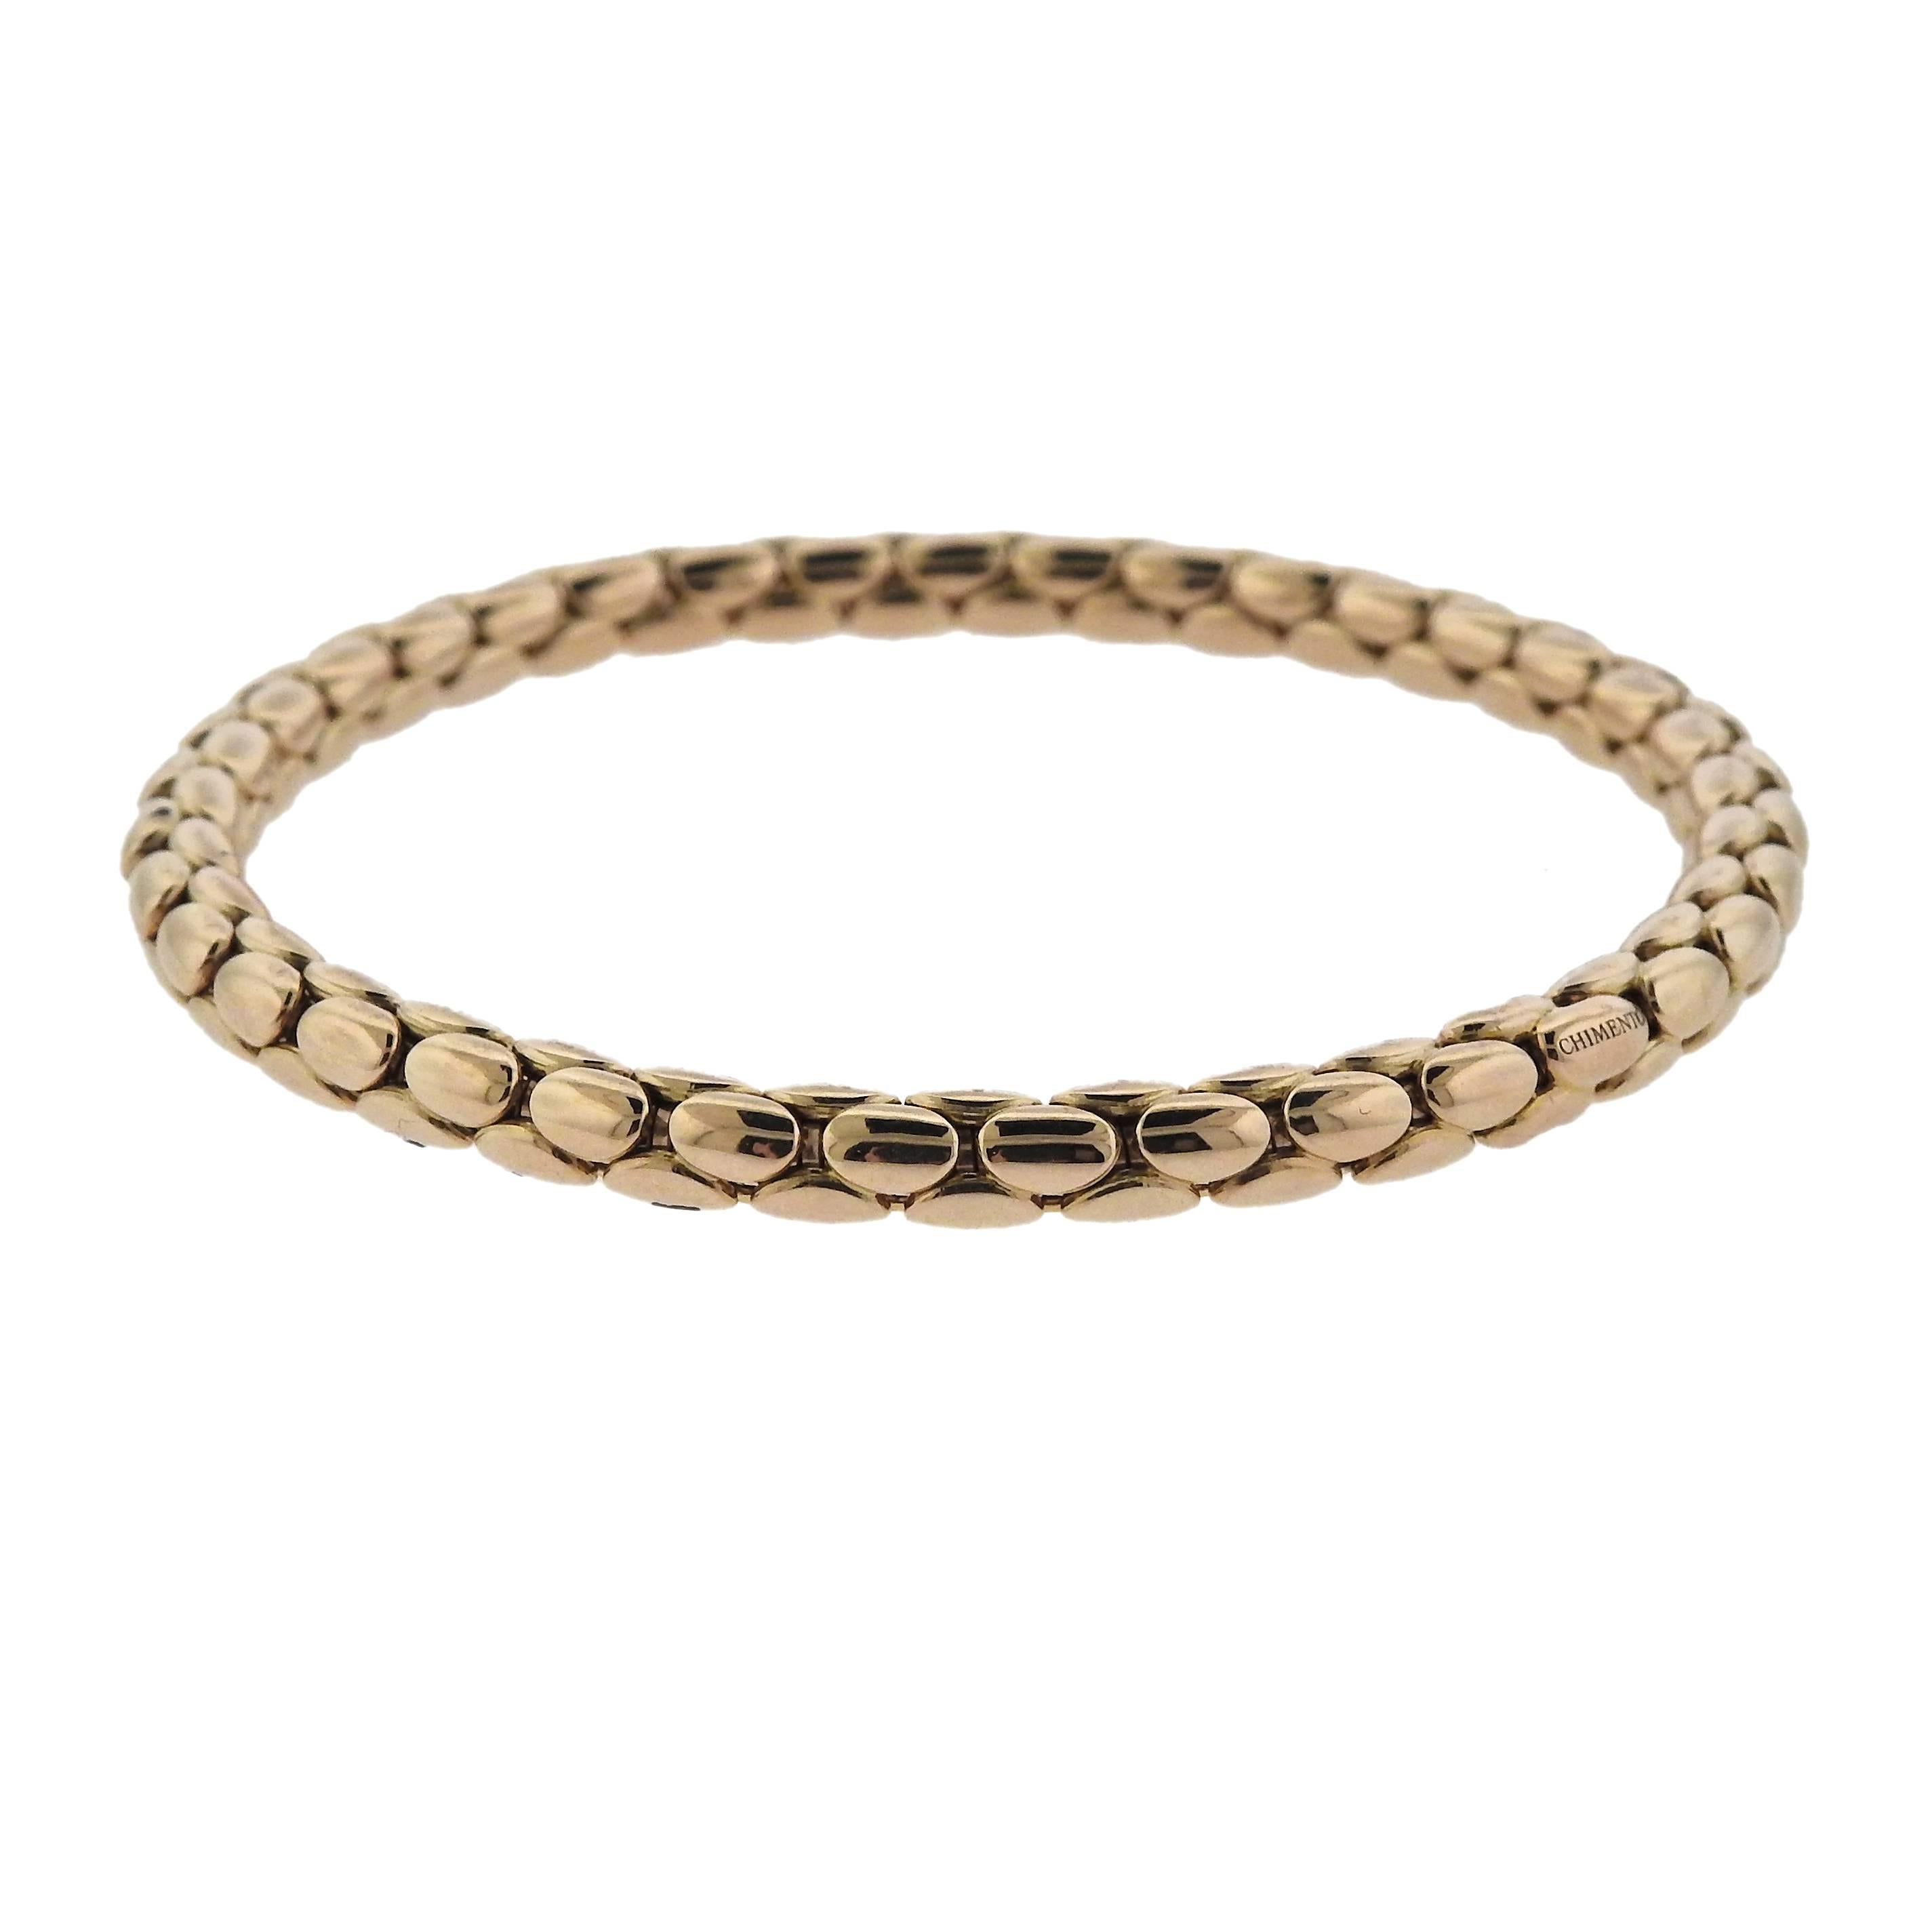 18k rose gold flexible bracelet, crafted by Chimento. Retail $2410.  Bracelet is slightly flexible, pull on design (does not have a clasp). Inner diameter is 56mm, will fit approx. 6.75